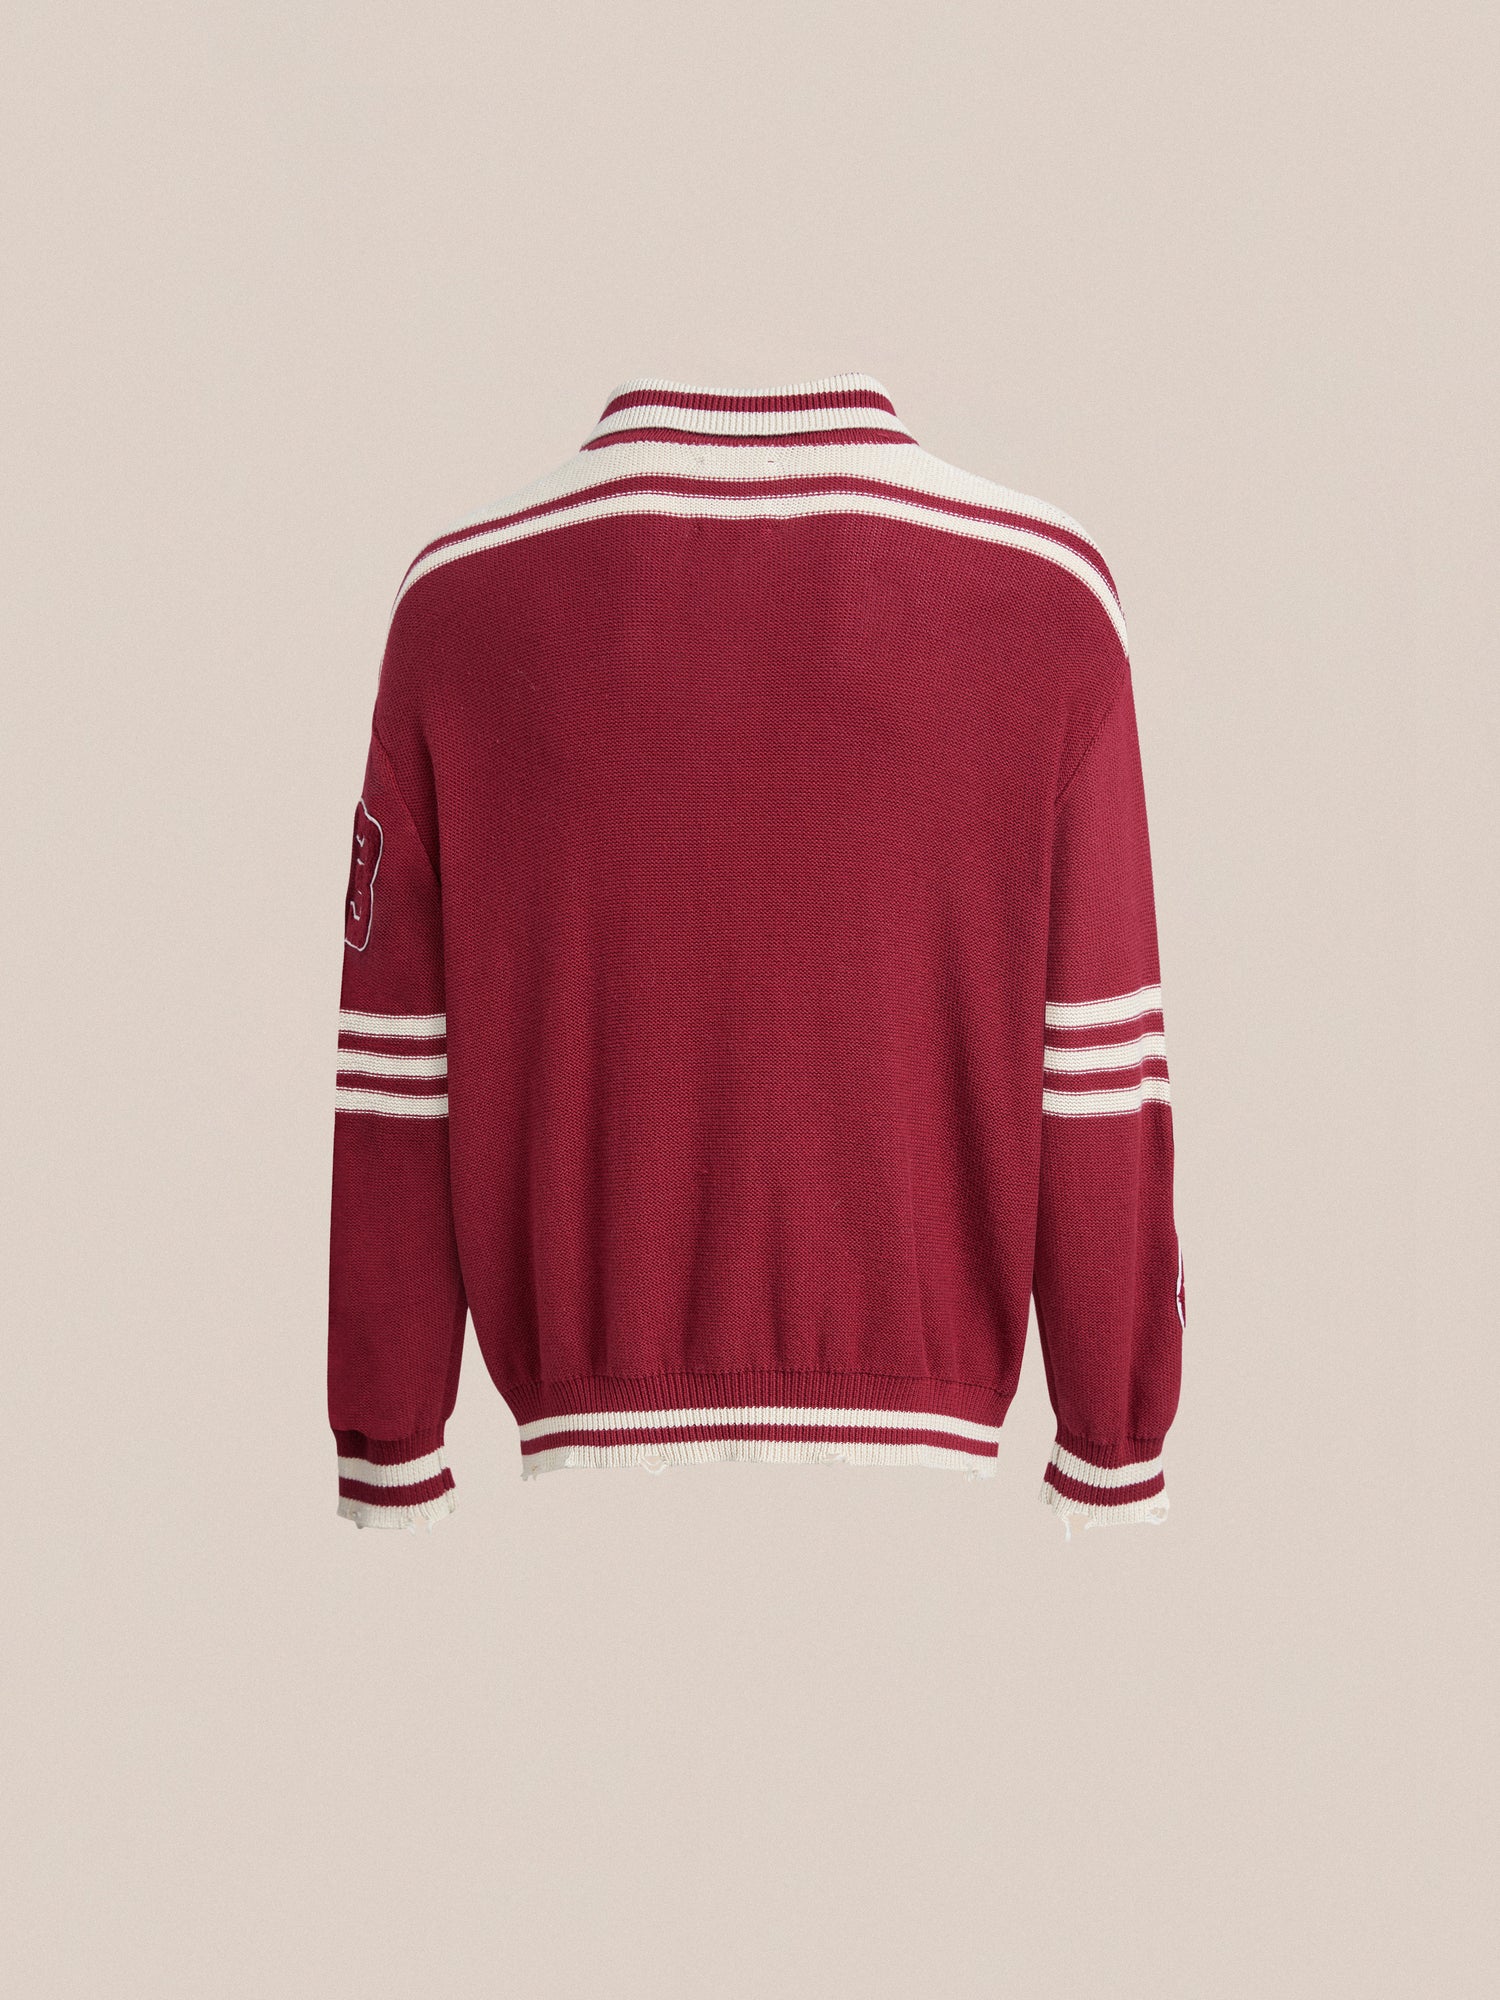 The back of a red sweater with white stripes features a Found Fin Varsity Patch Collared Cardigan.